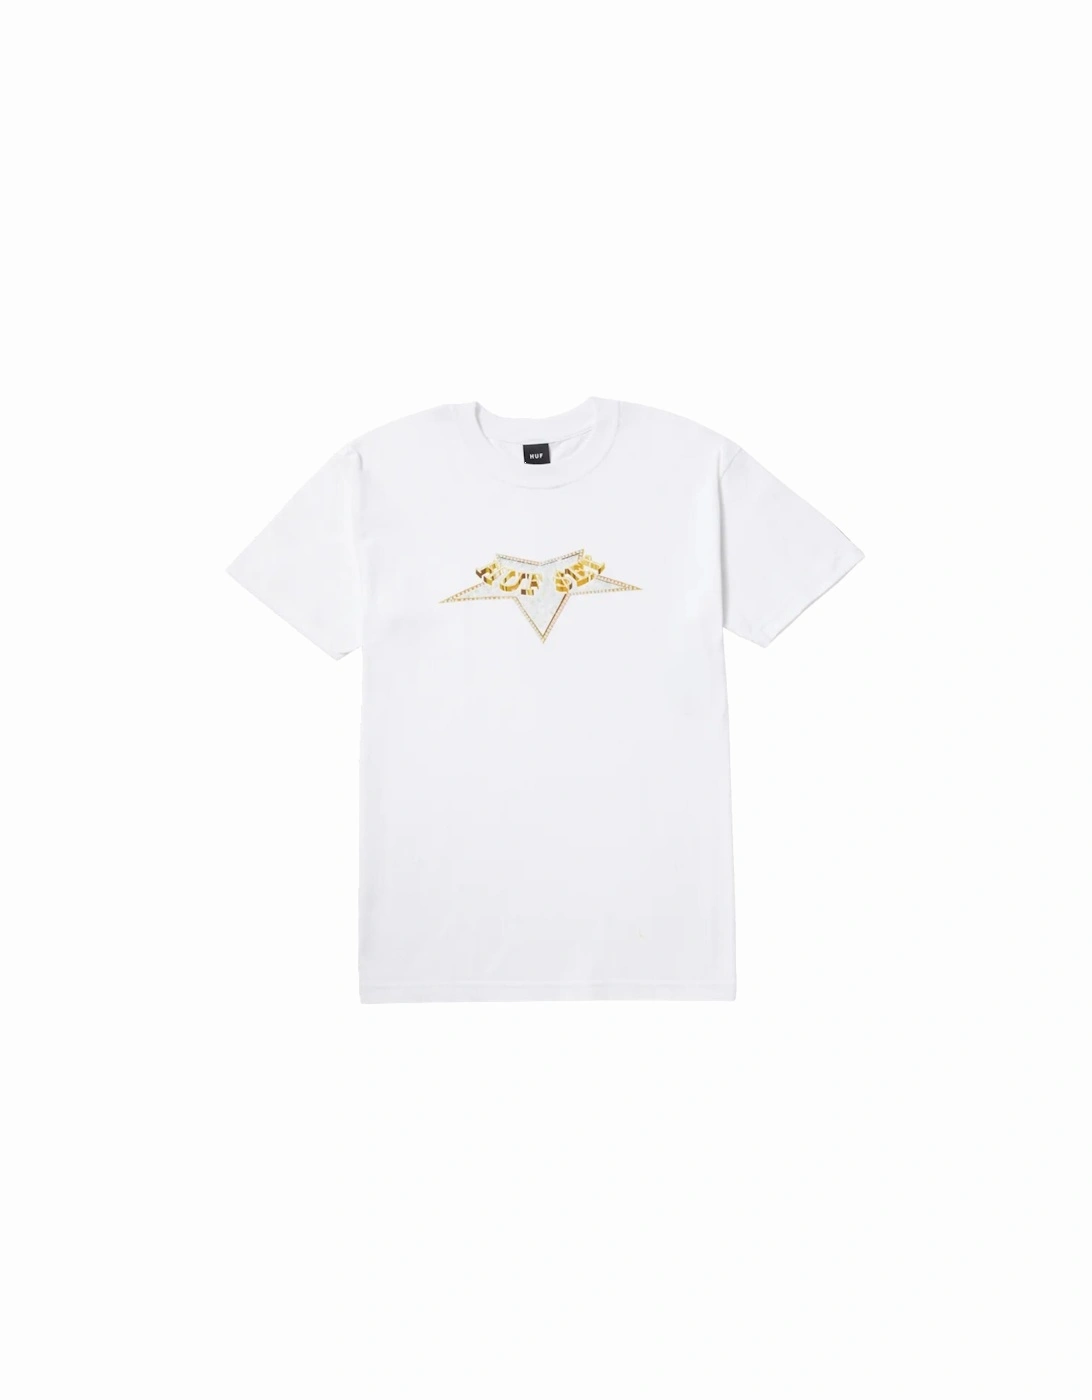 Records S/S Tee - White, 3 of 2